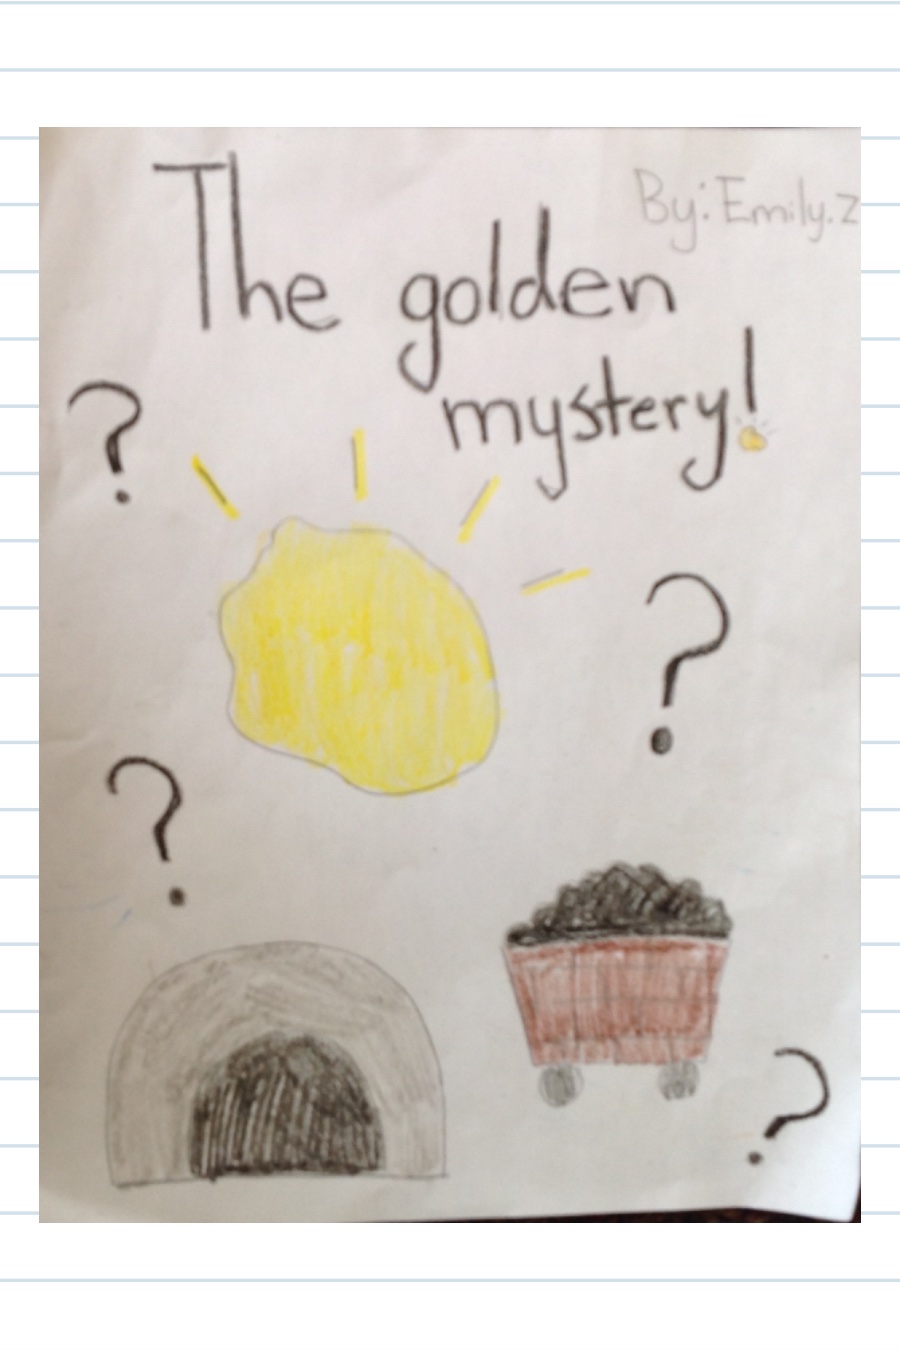 The Gold Mystery by Emily Z